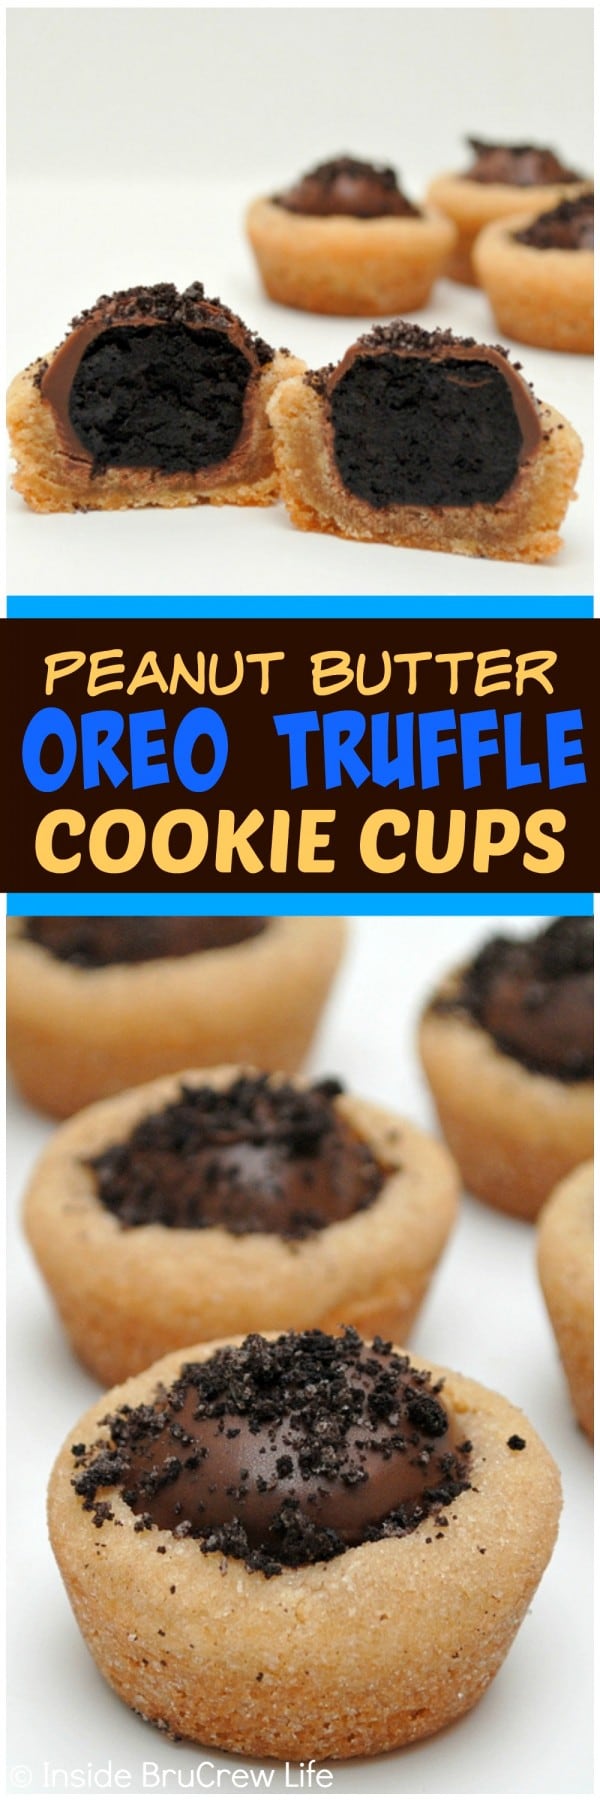 Peanut Butter Oreo Truffle Cups - adding an Oreo truffle to the top of these soft peanut butter cups is an awesome idea! Great dessert recipe!